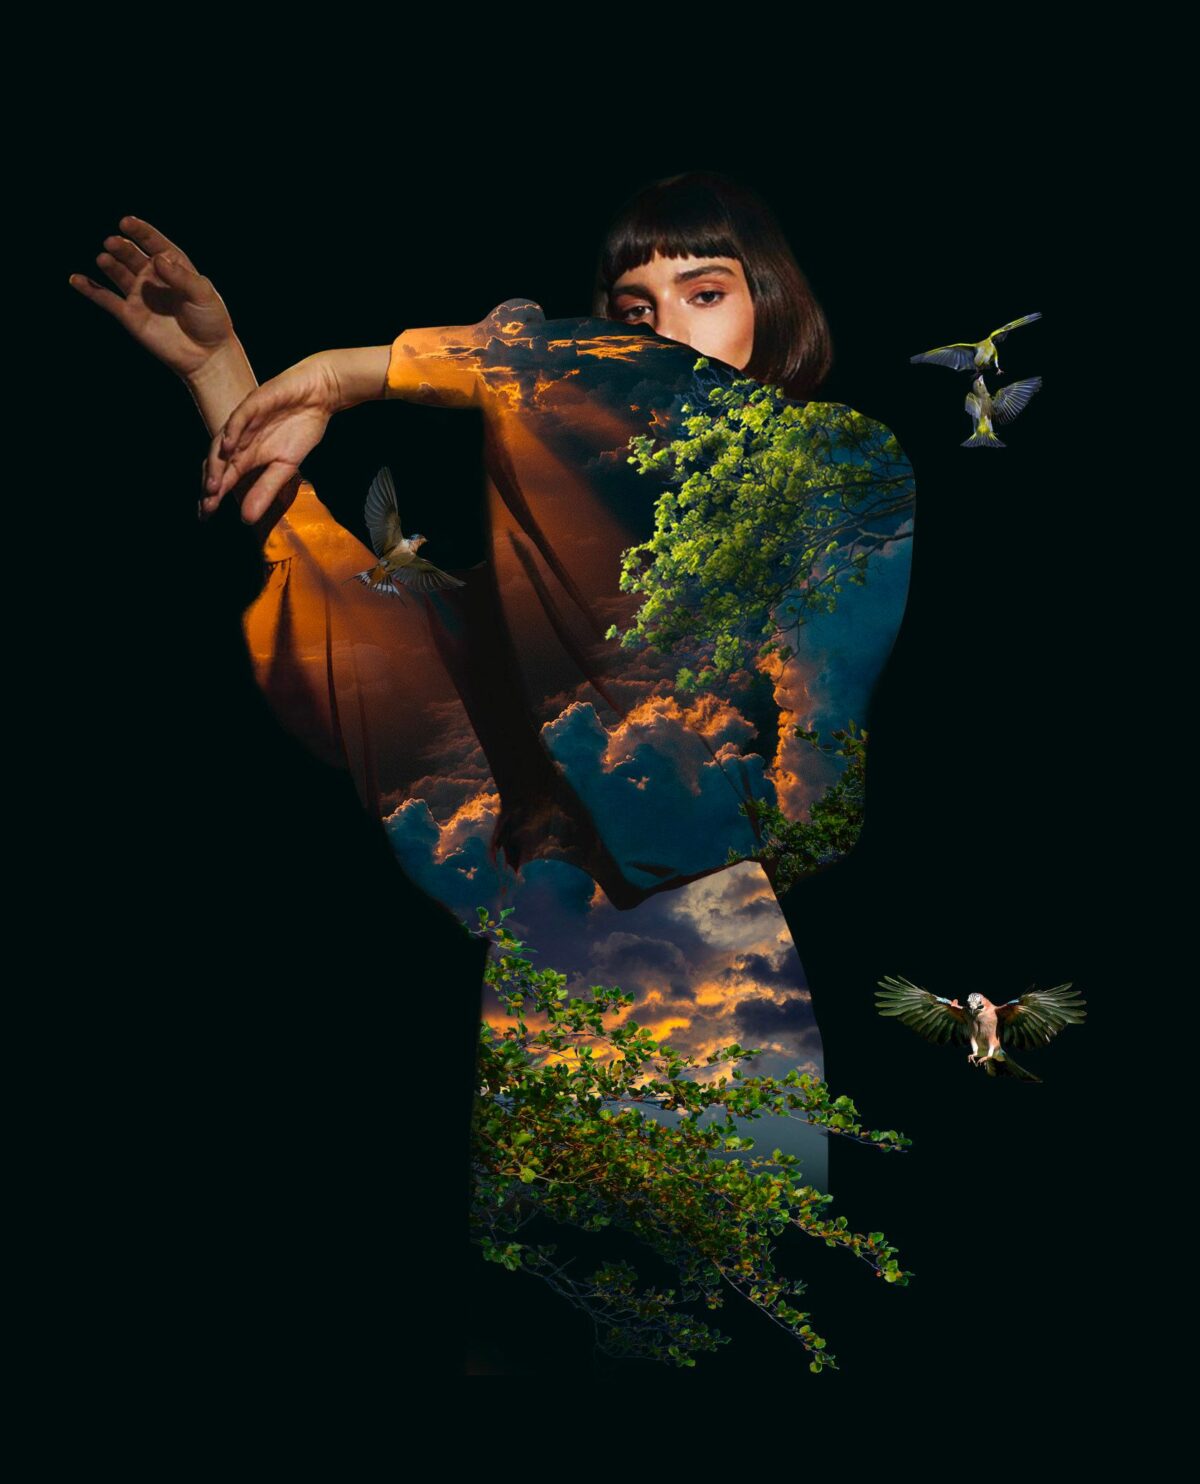 Girls And Nature Incredible Digital Collages By Charles Bentley 21